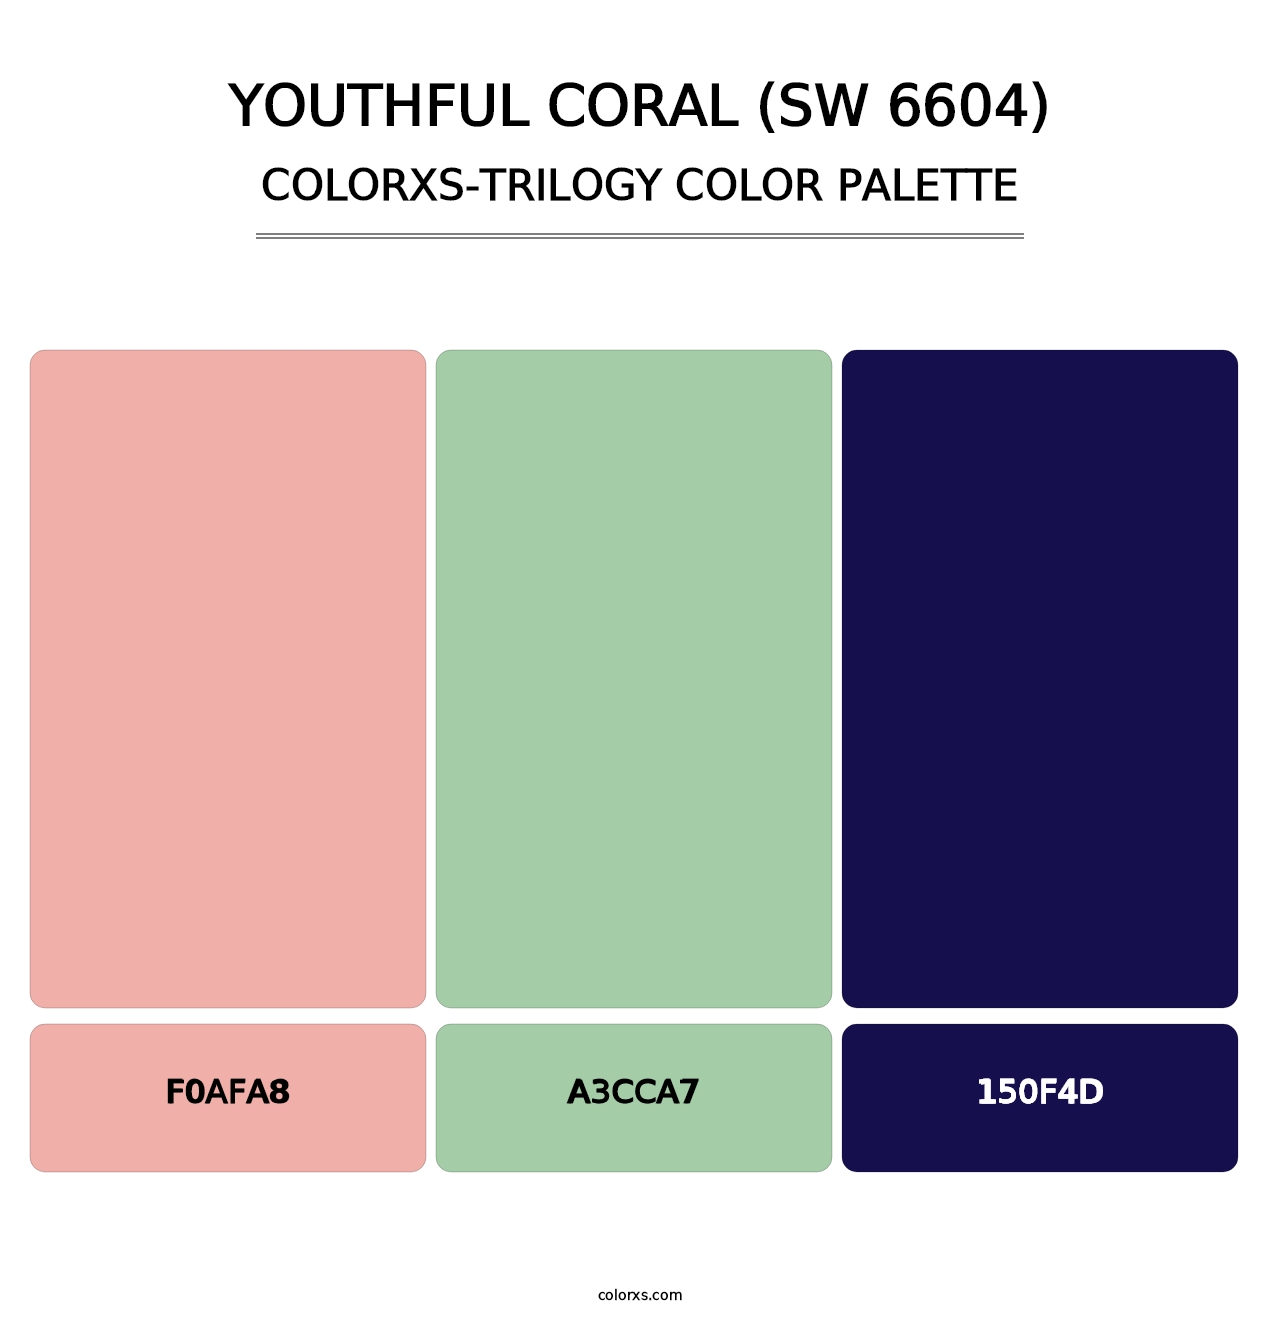 Youthful Coral (SW 6604) - Colorxs Trilogy Palette